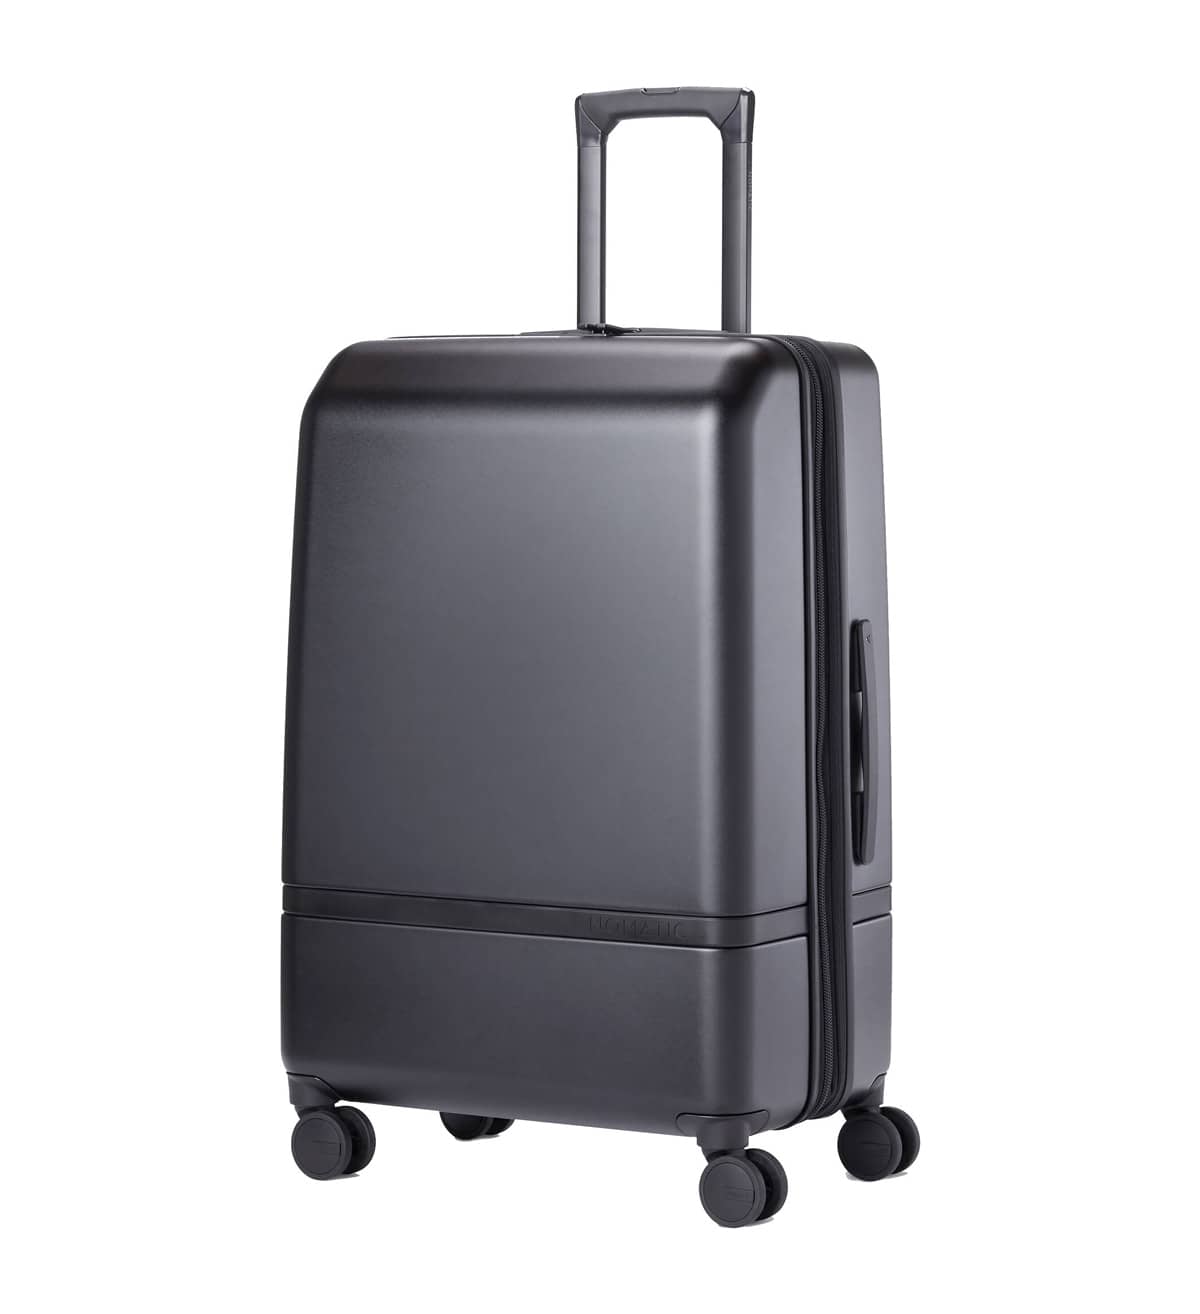 Best Checked Luggage for Men